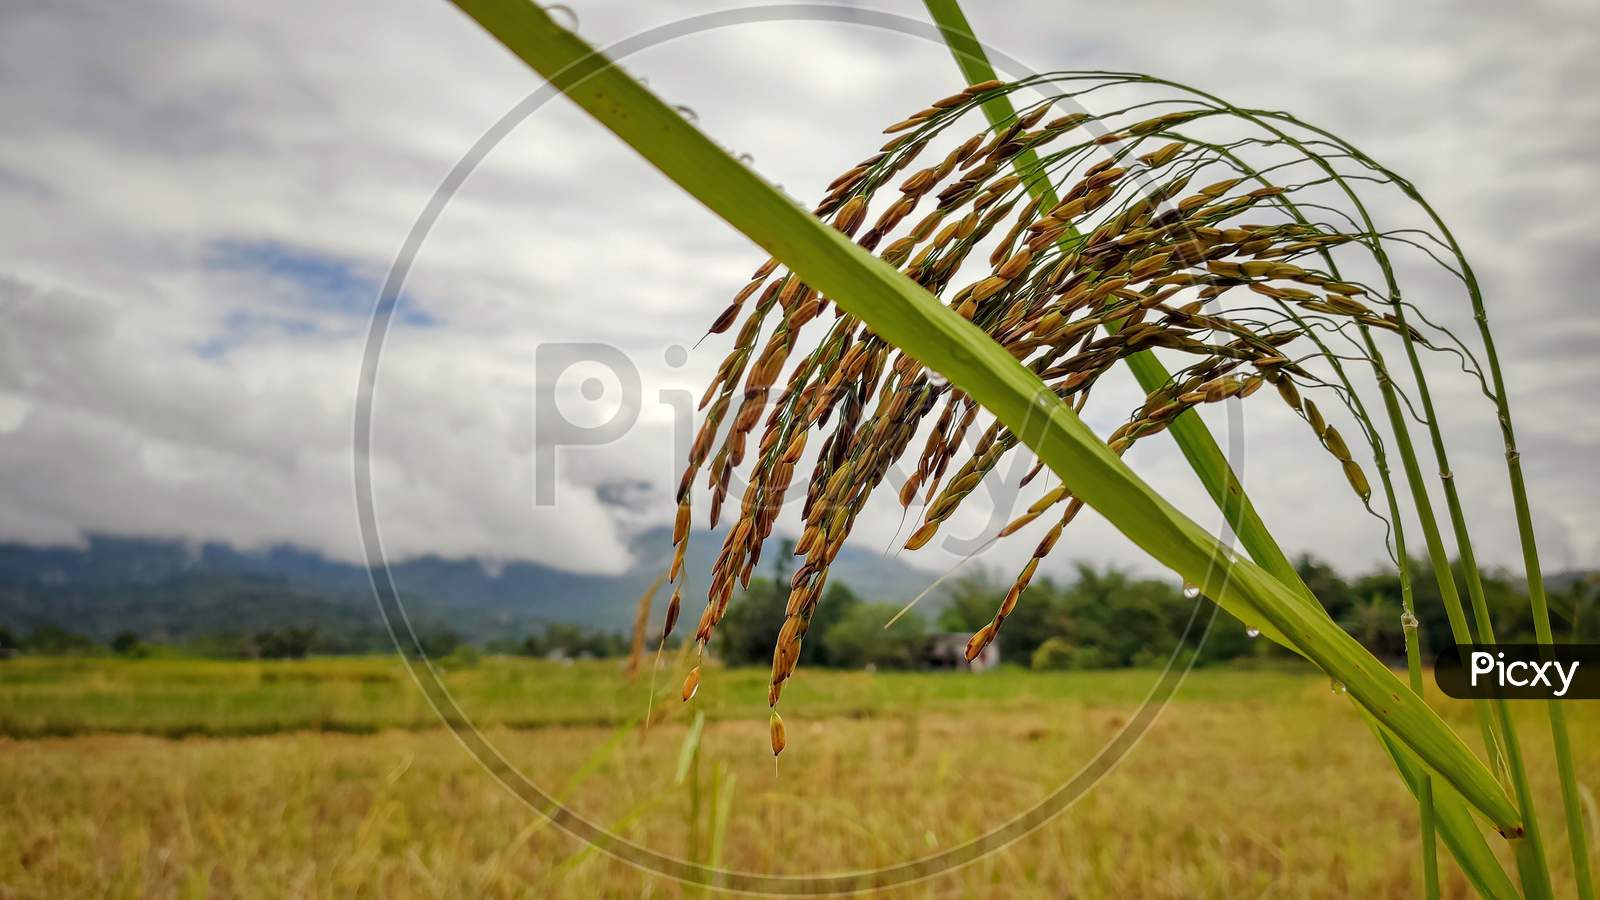 Bunch of golden paddy grain with field background